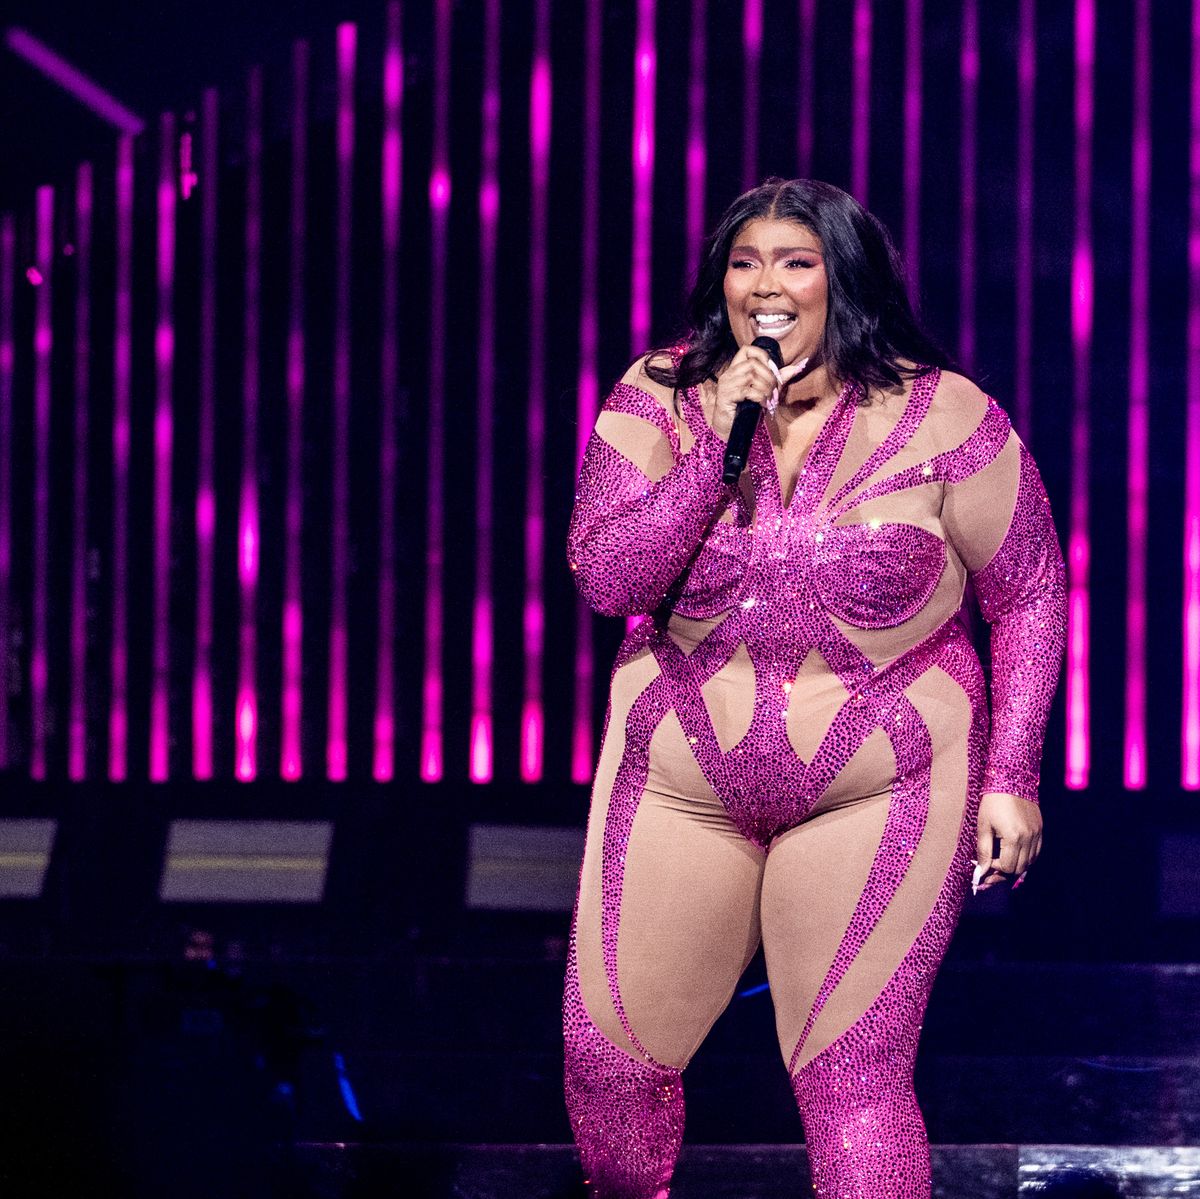 https://hips.hearstapps.com/hmg-prod/images/lizzo-performs-at-the-kia-forum-on-november-18-2022-in-news-photo-1668959644.jpg?crop=0.502xw:0.752xh;0.308xw,0.0505xh&resize=1200:*